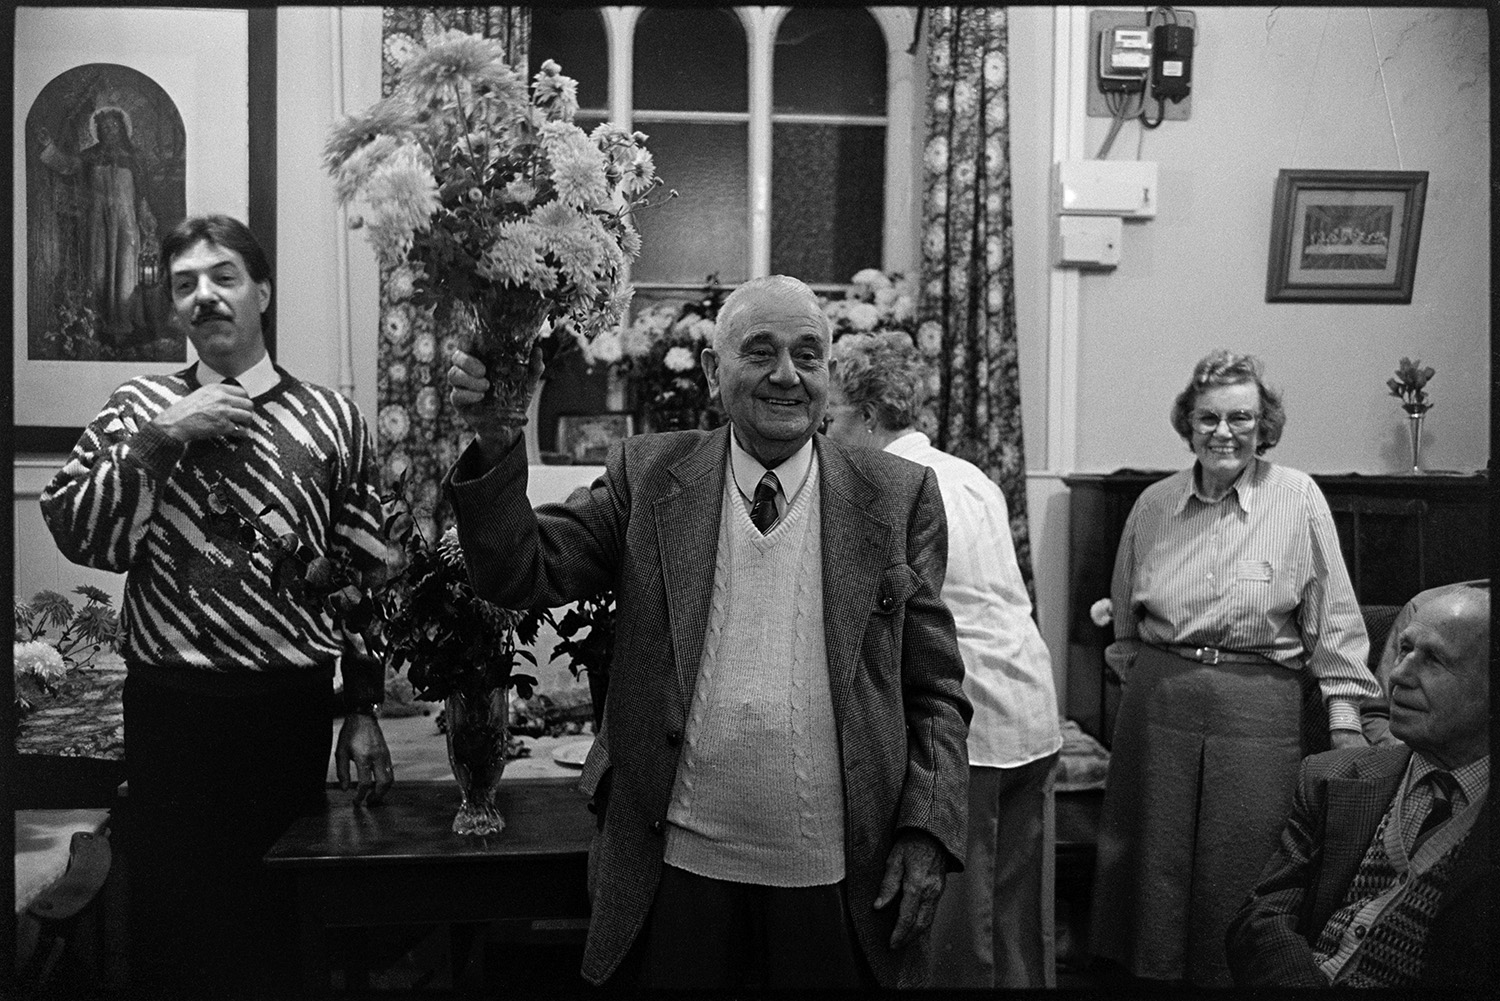 Congregational chapel Harvest supper, sale of produce after supper.
[Sale of produce after the Harvest Festival supper at Chulmleigh Congregational chapel. A man is holding up a bunch of flowers. A window and table with goods and vases of flowers is in the background, with other people watching.]